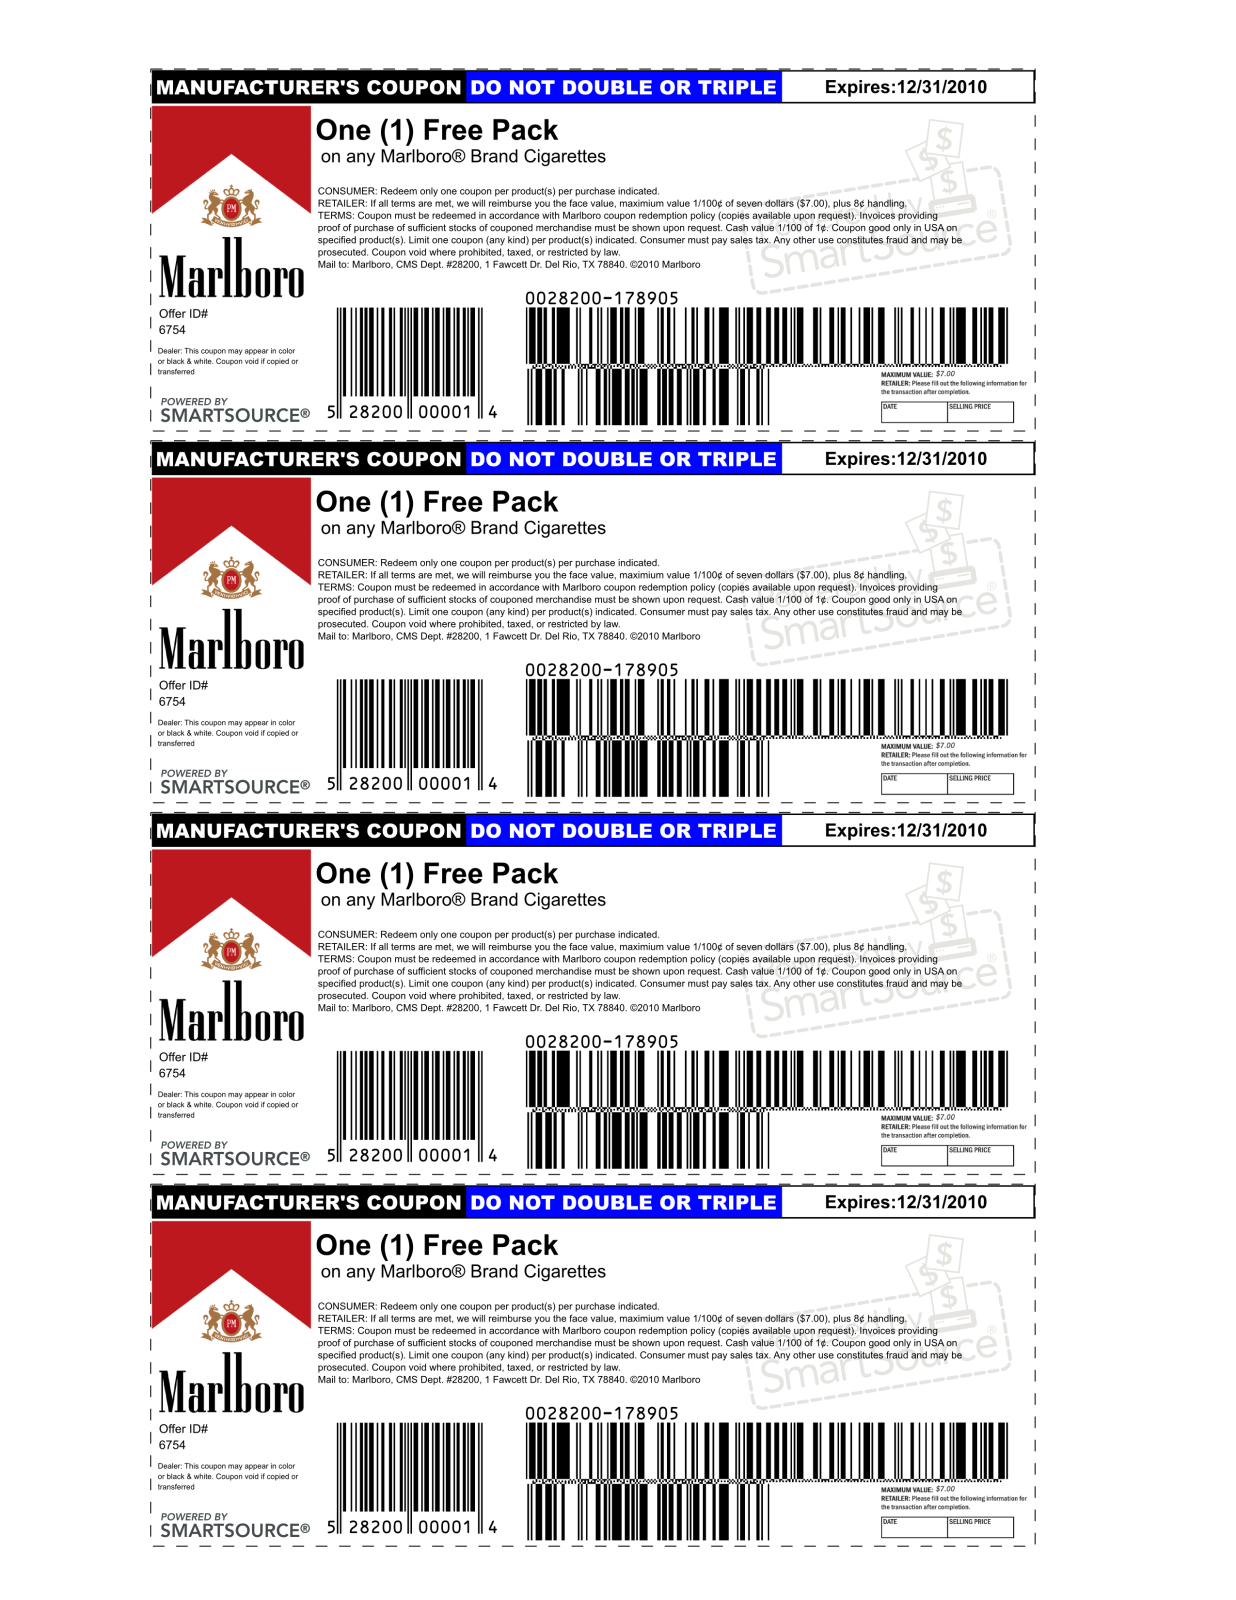 Marlboro Coupons Printable 2013 | Is Using A Possibly Fake Coupon - Free Pack Of Cigarettes Printable Coupon